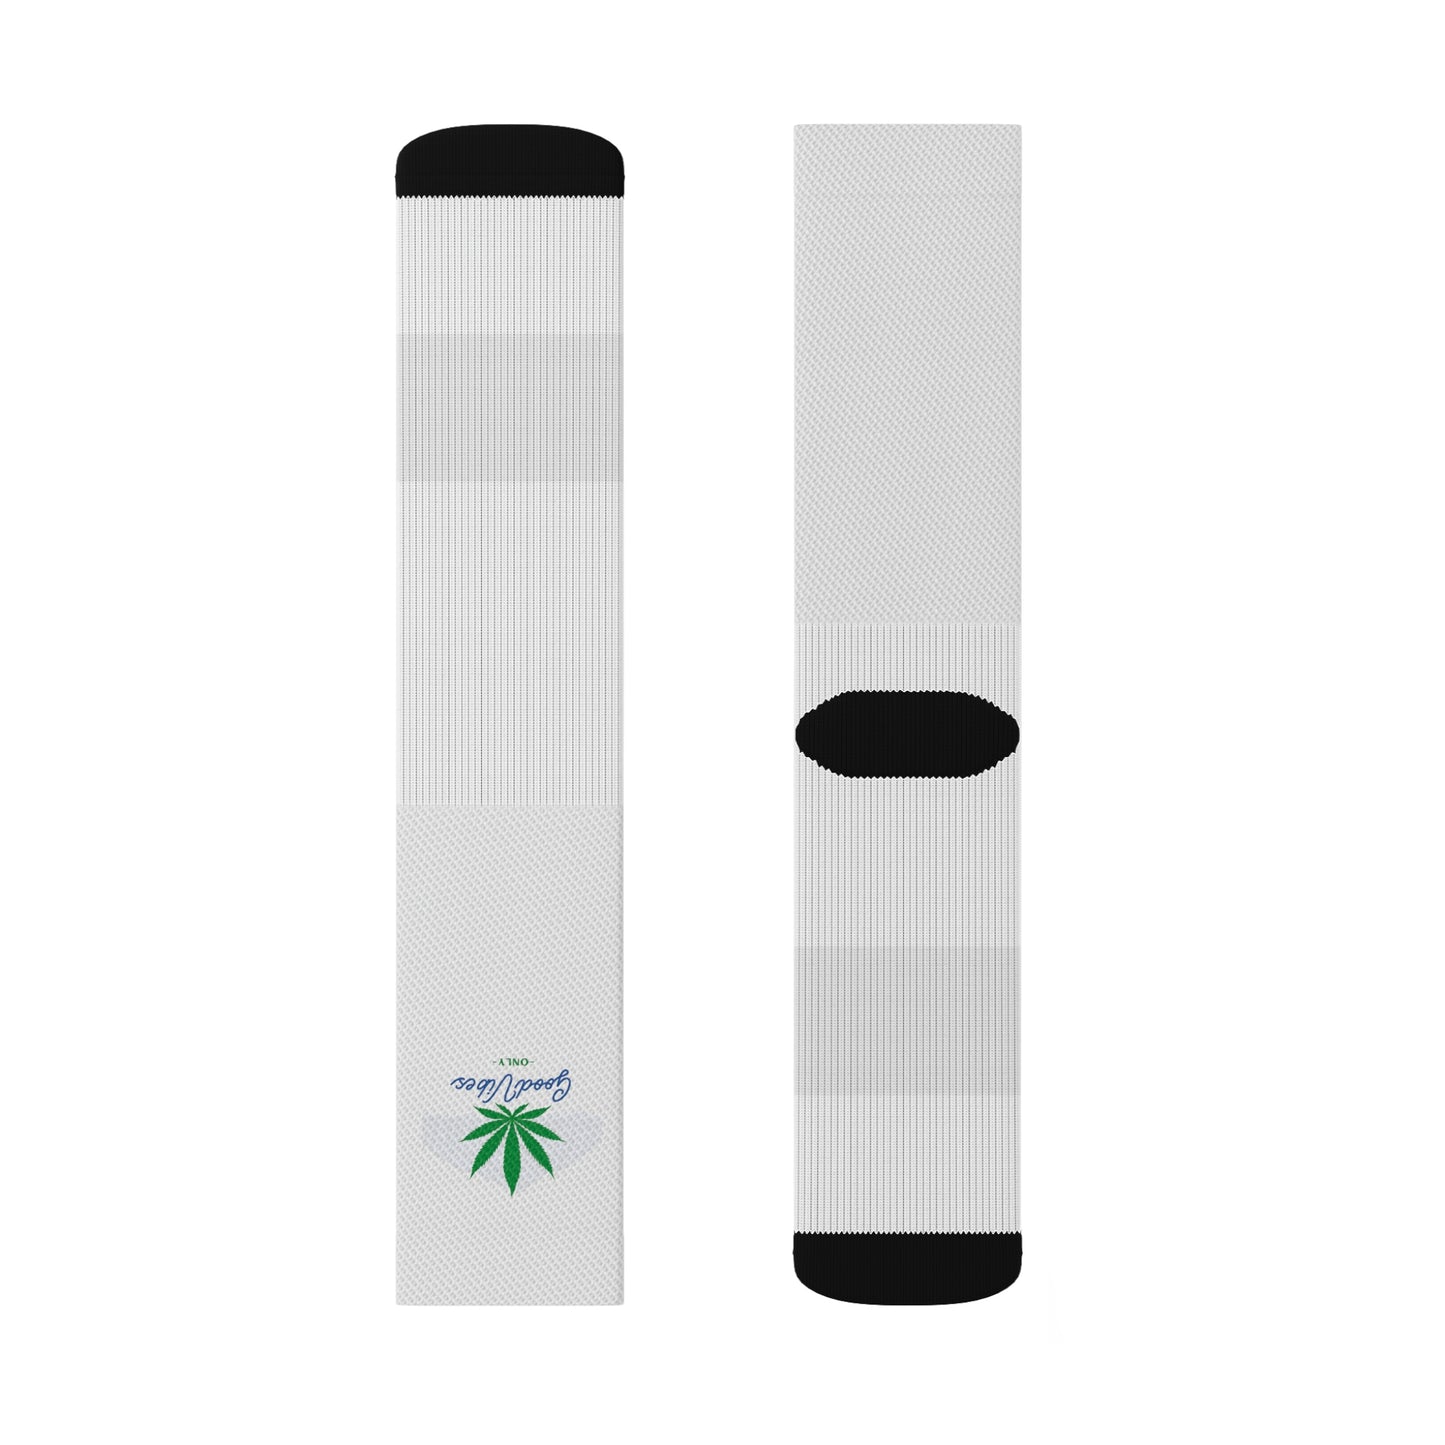 a pair of black and white stoner socks that show a weed leaf on the top front of the sock with a phrase below it that reads "Good Vibes" in the color blue and "Only" in the color green